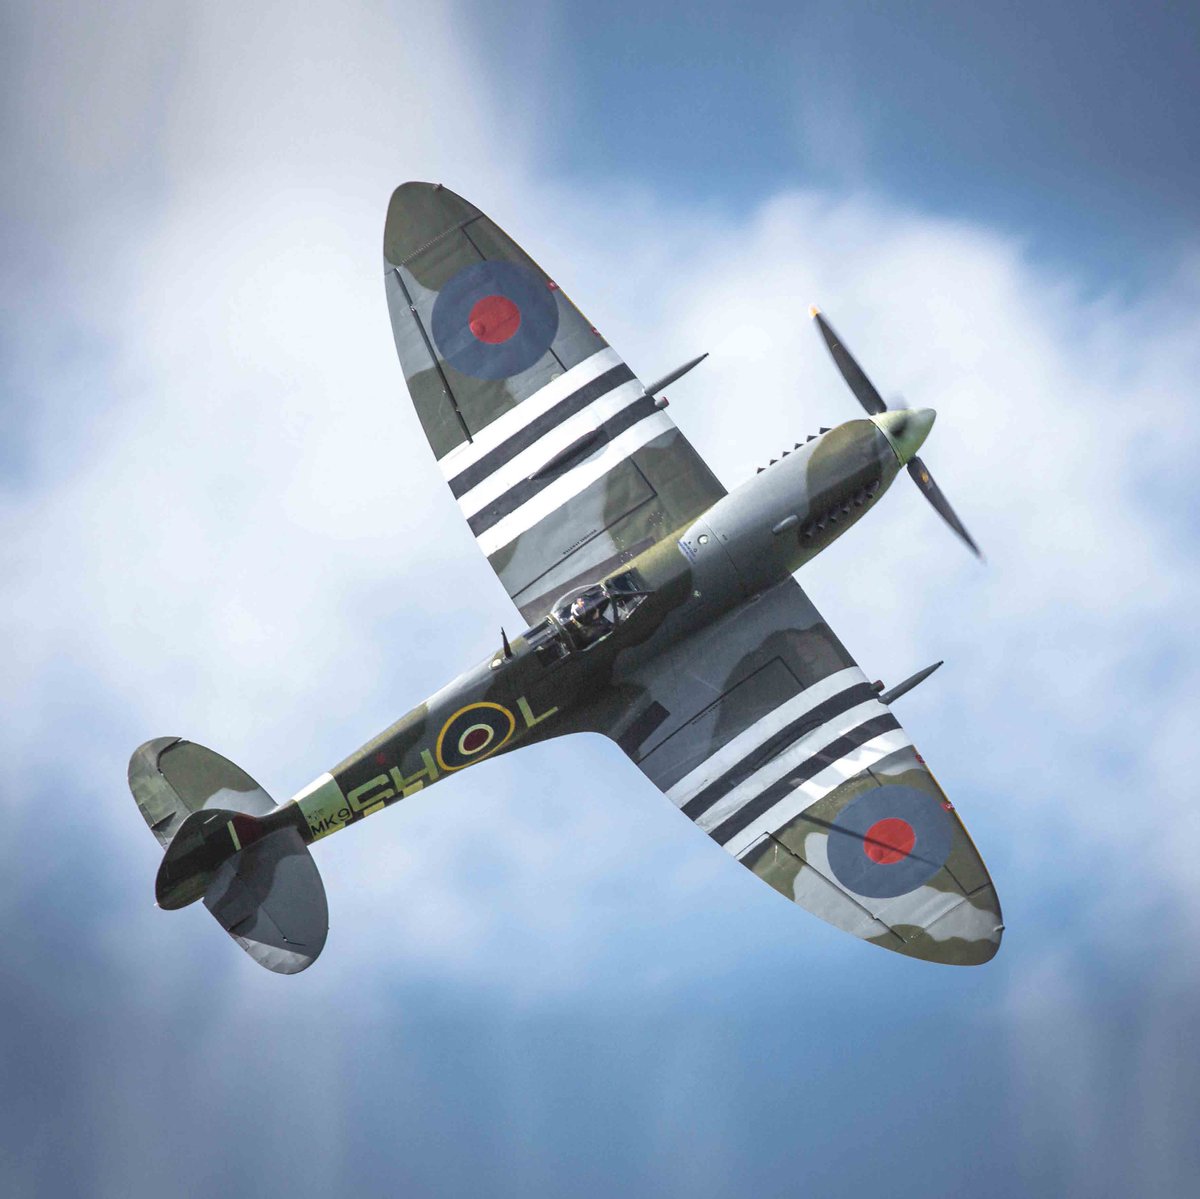 12 Days of @RAF images for Christmas - Day 12! A Spitfire wearing the allied recognition stripes performs an areal display at Duxford
#RAFCalendars  #12DaysOfRAF #ChristmasCountdown